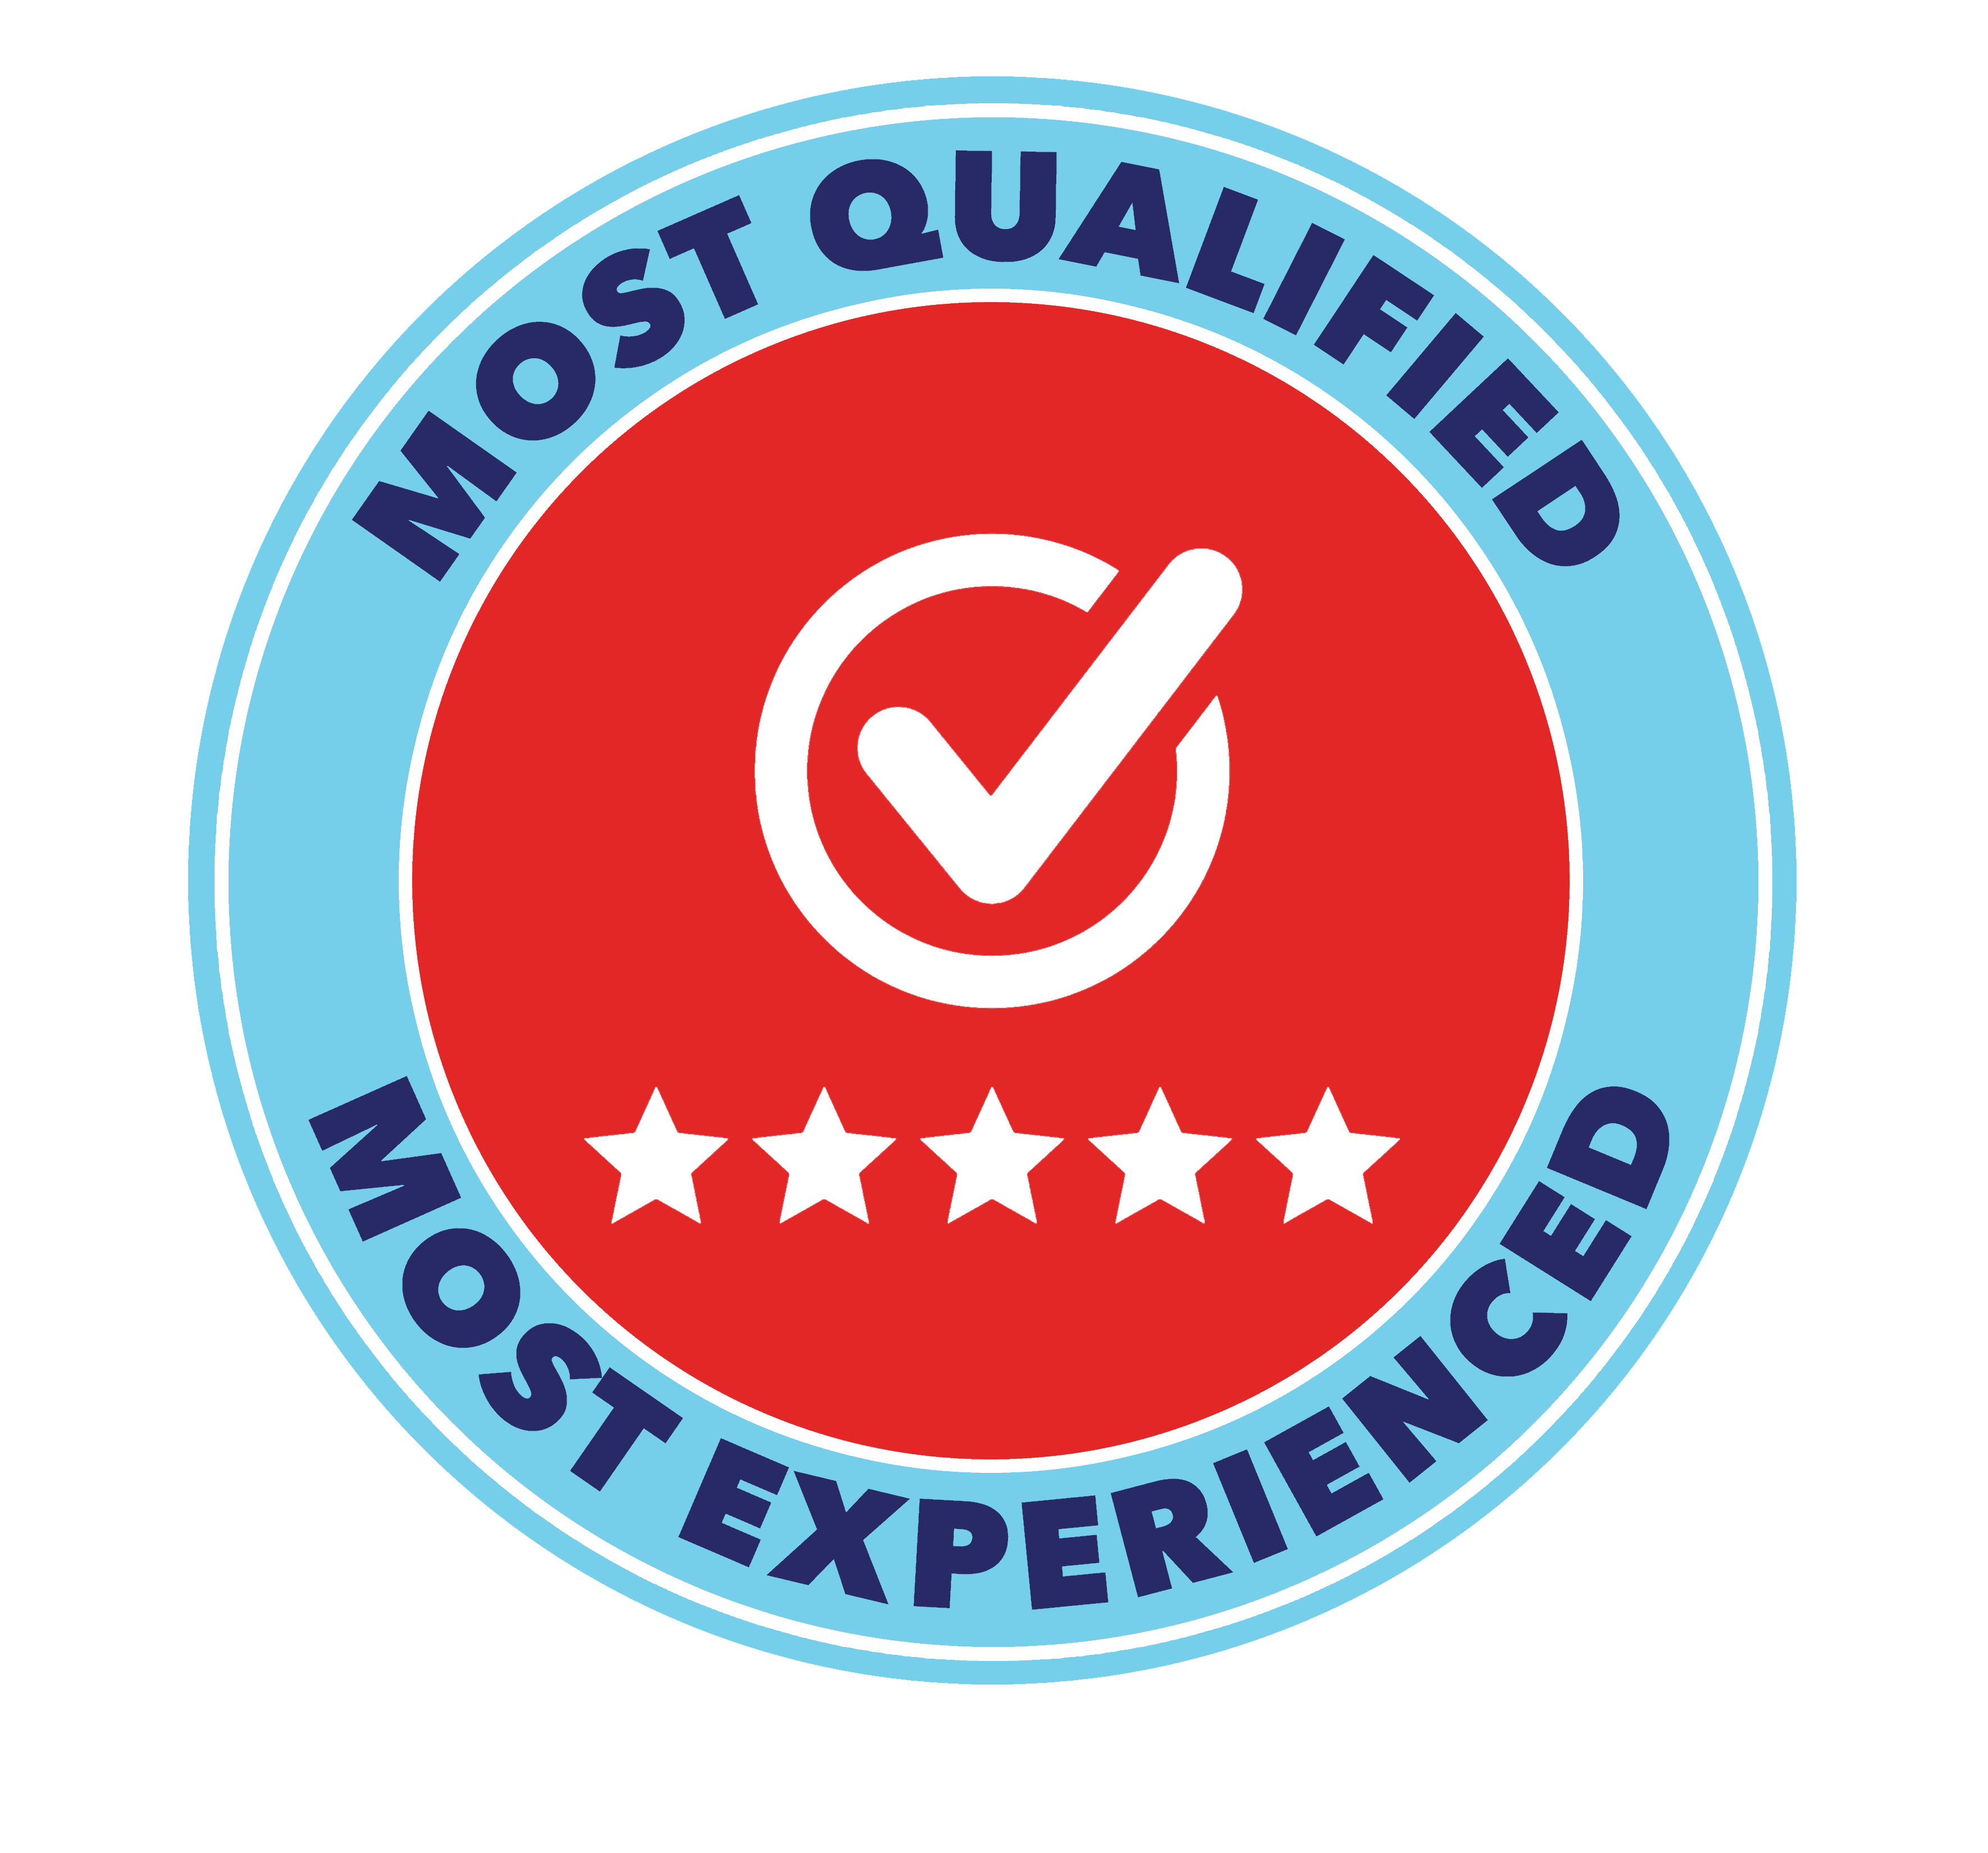 Most Qualified Experienced